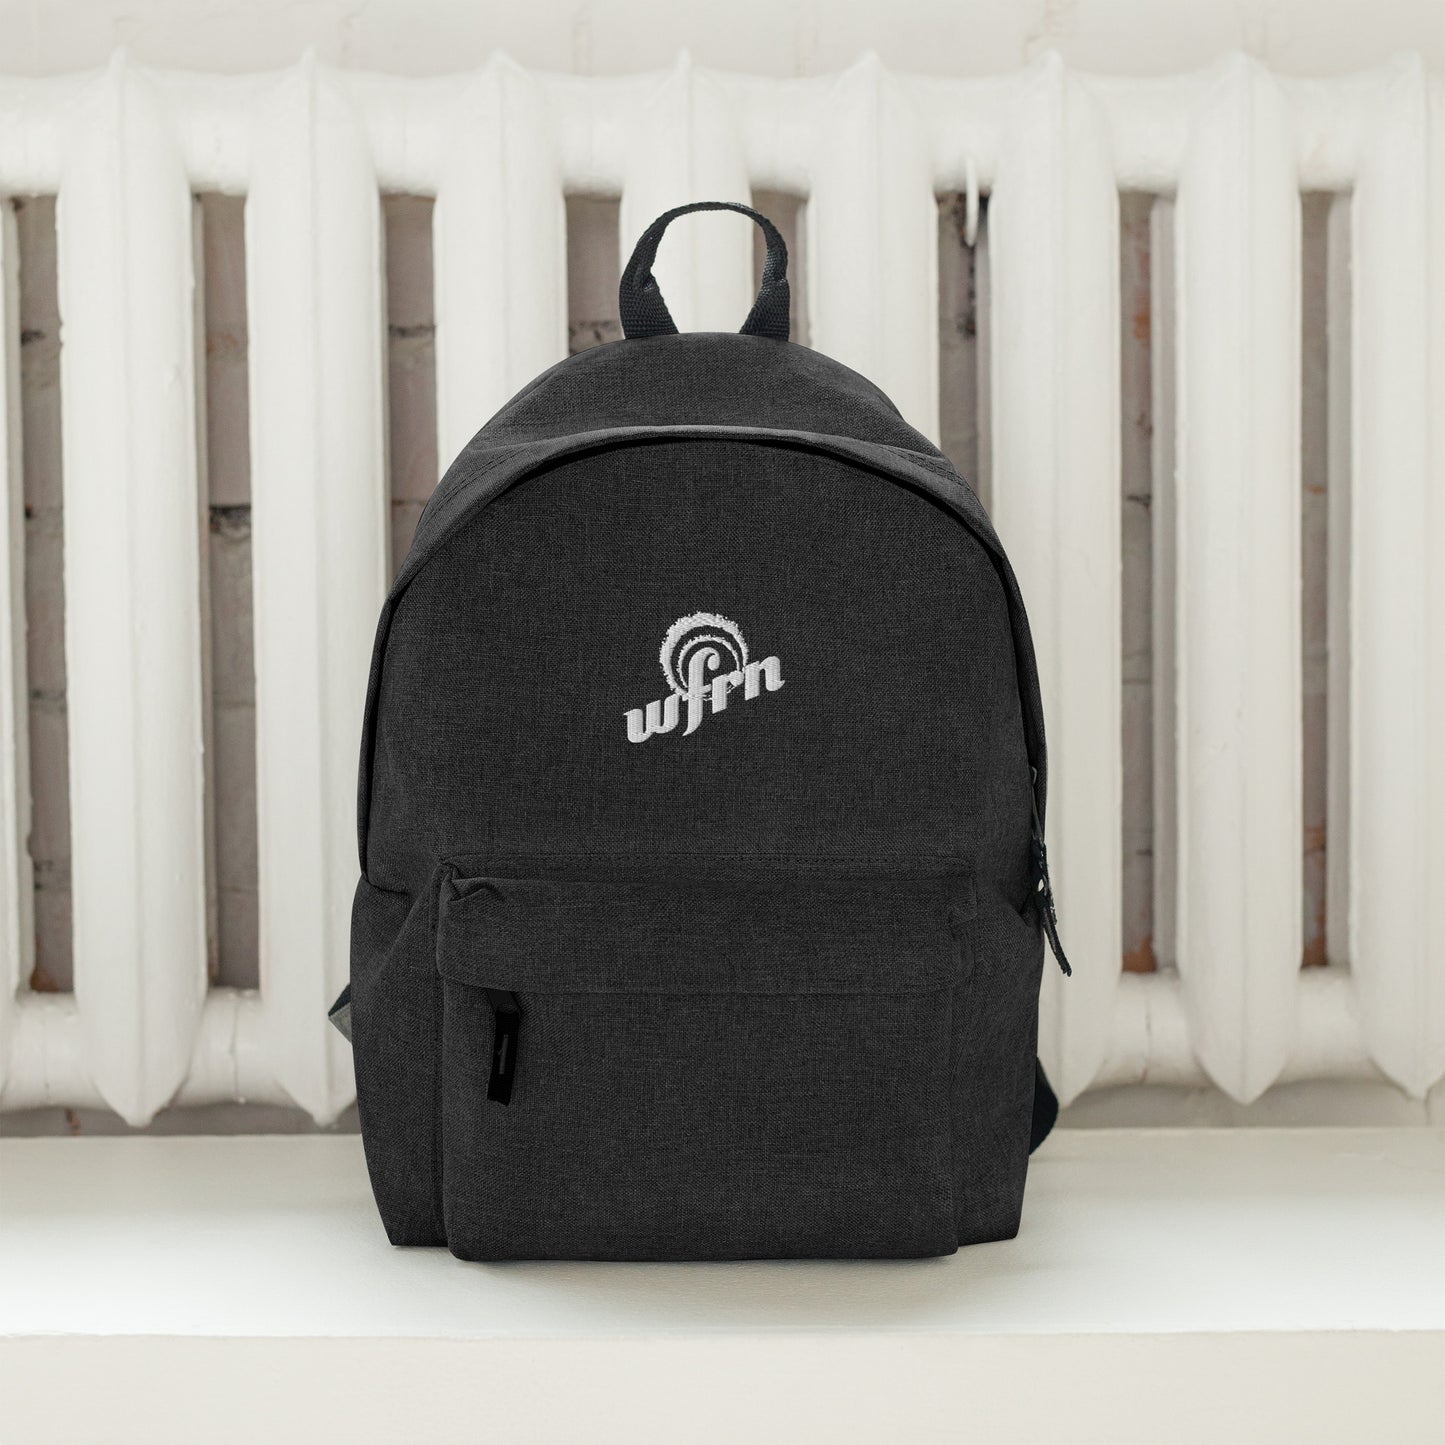 WFRN Embroidered Backpack